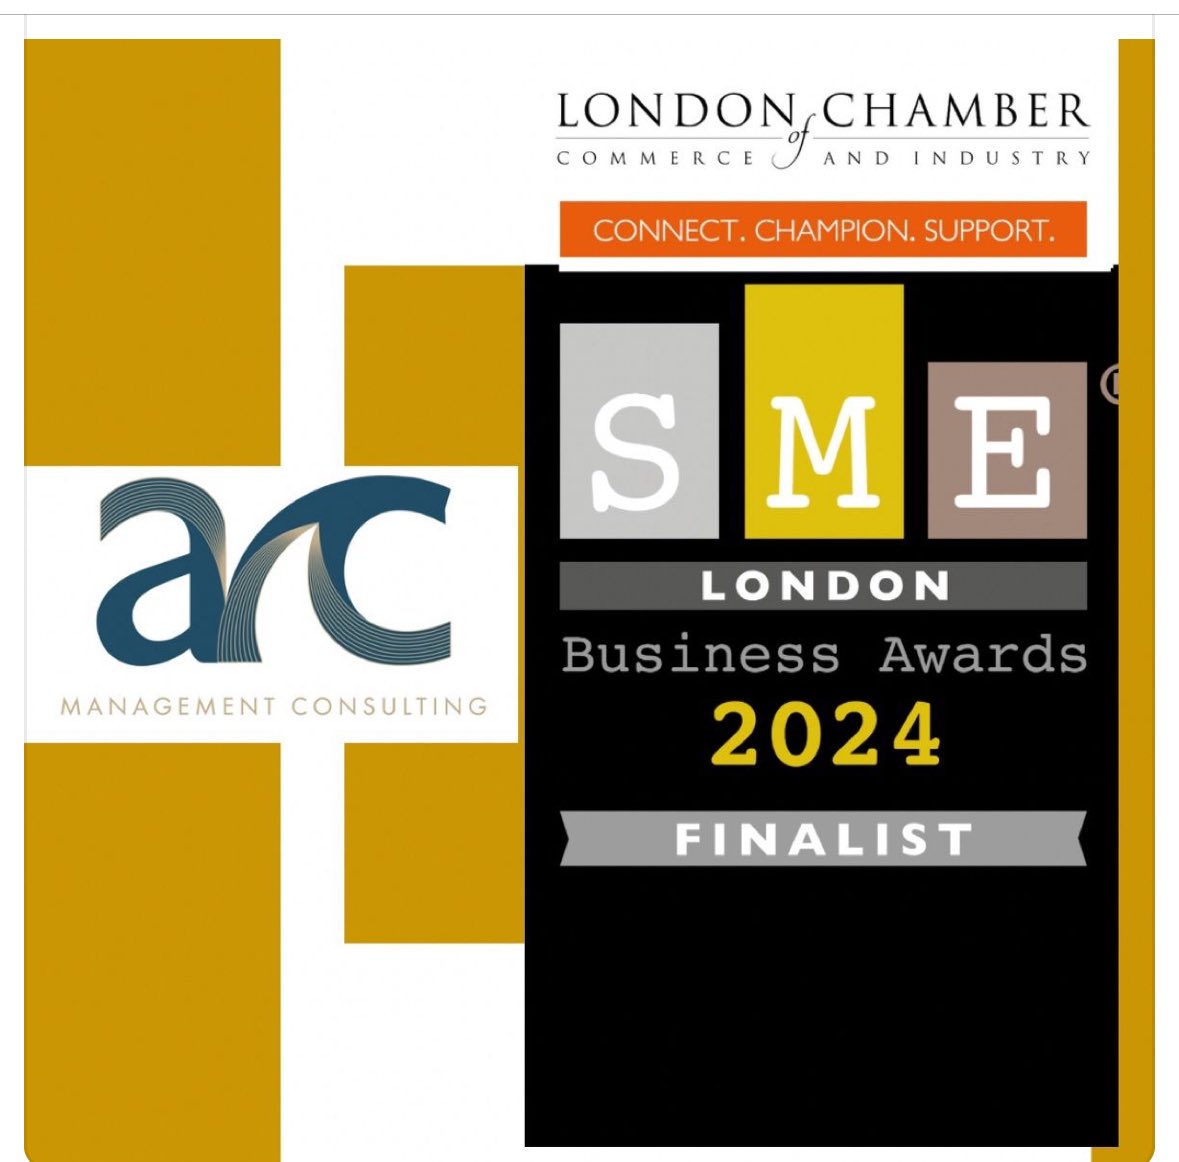 Looking forward to the London SME Business Awards @londonchamber @eventsandprmk @arcmanagementco #businessawards